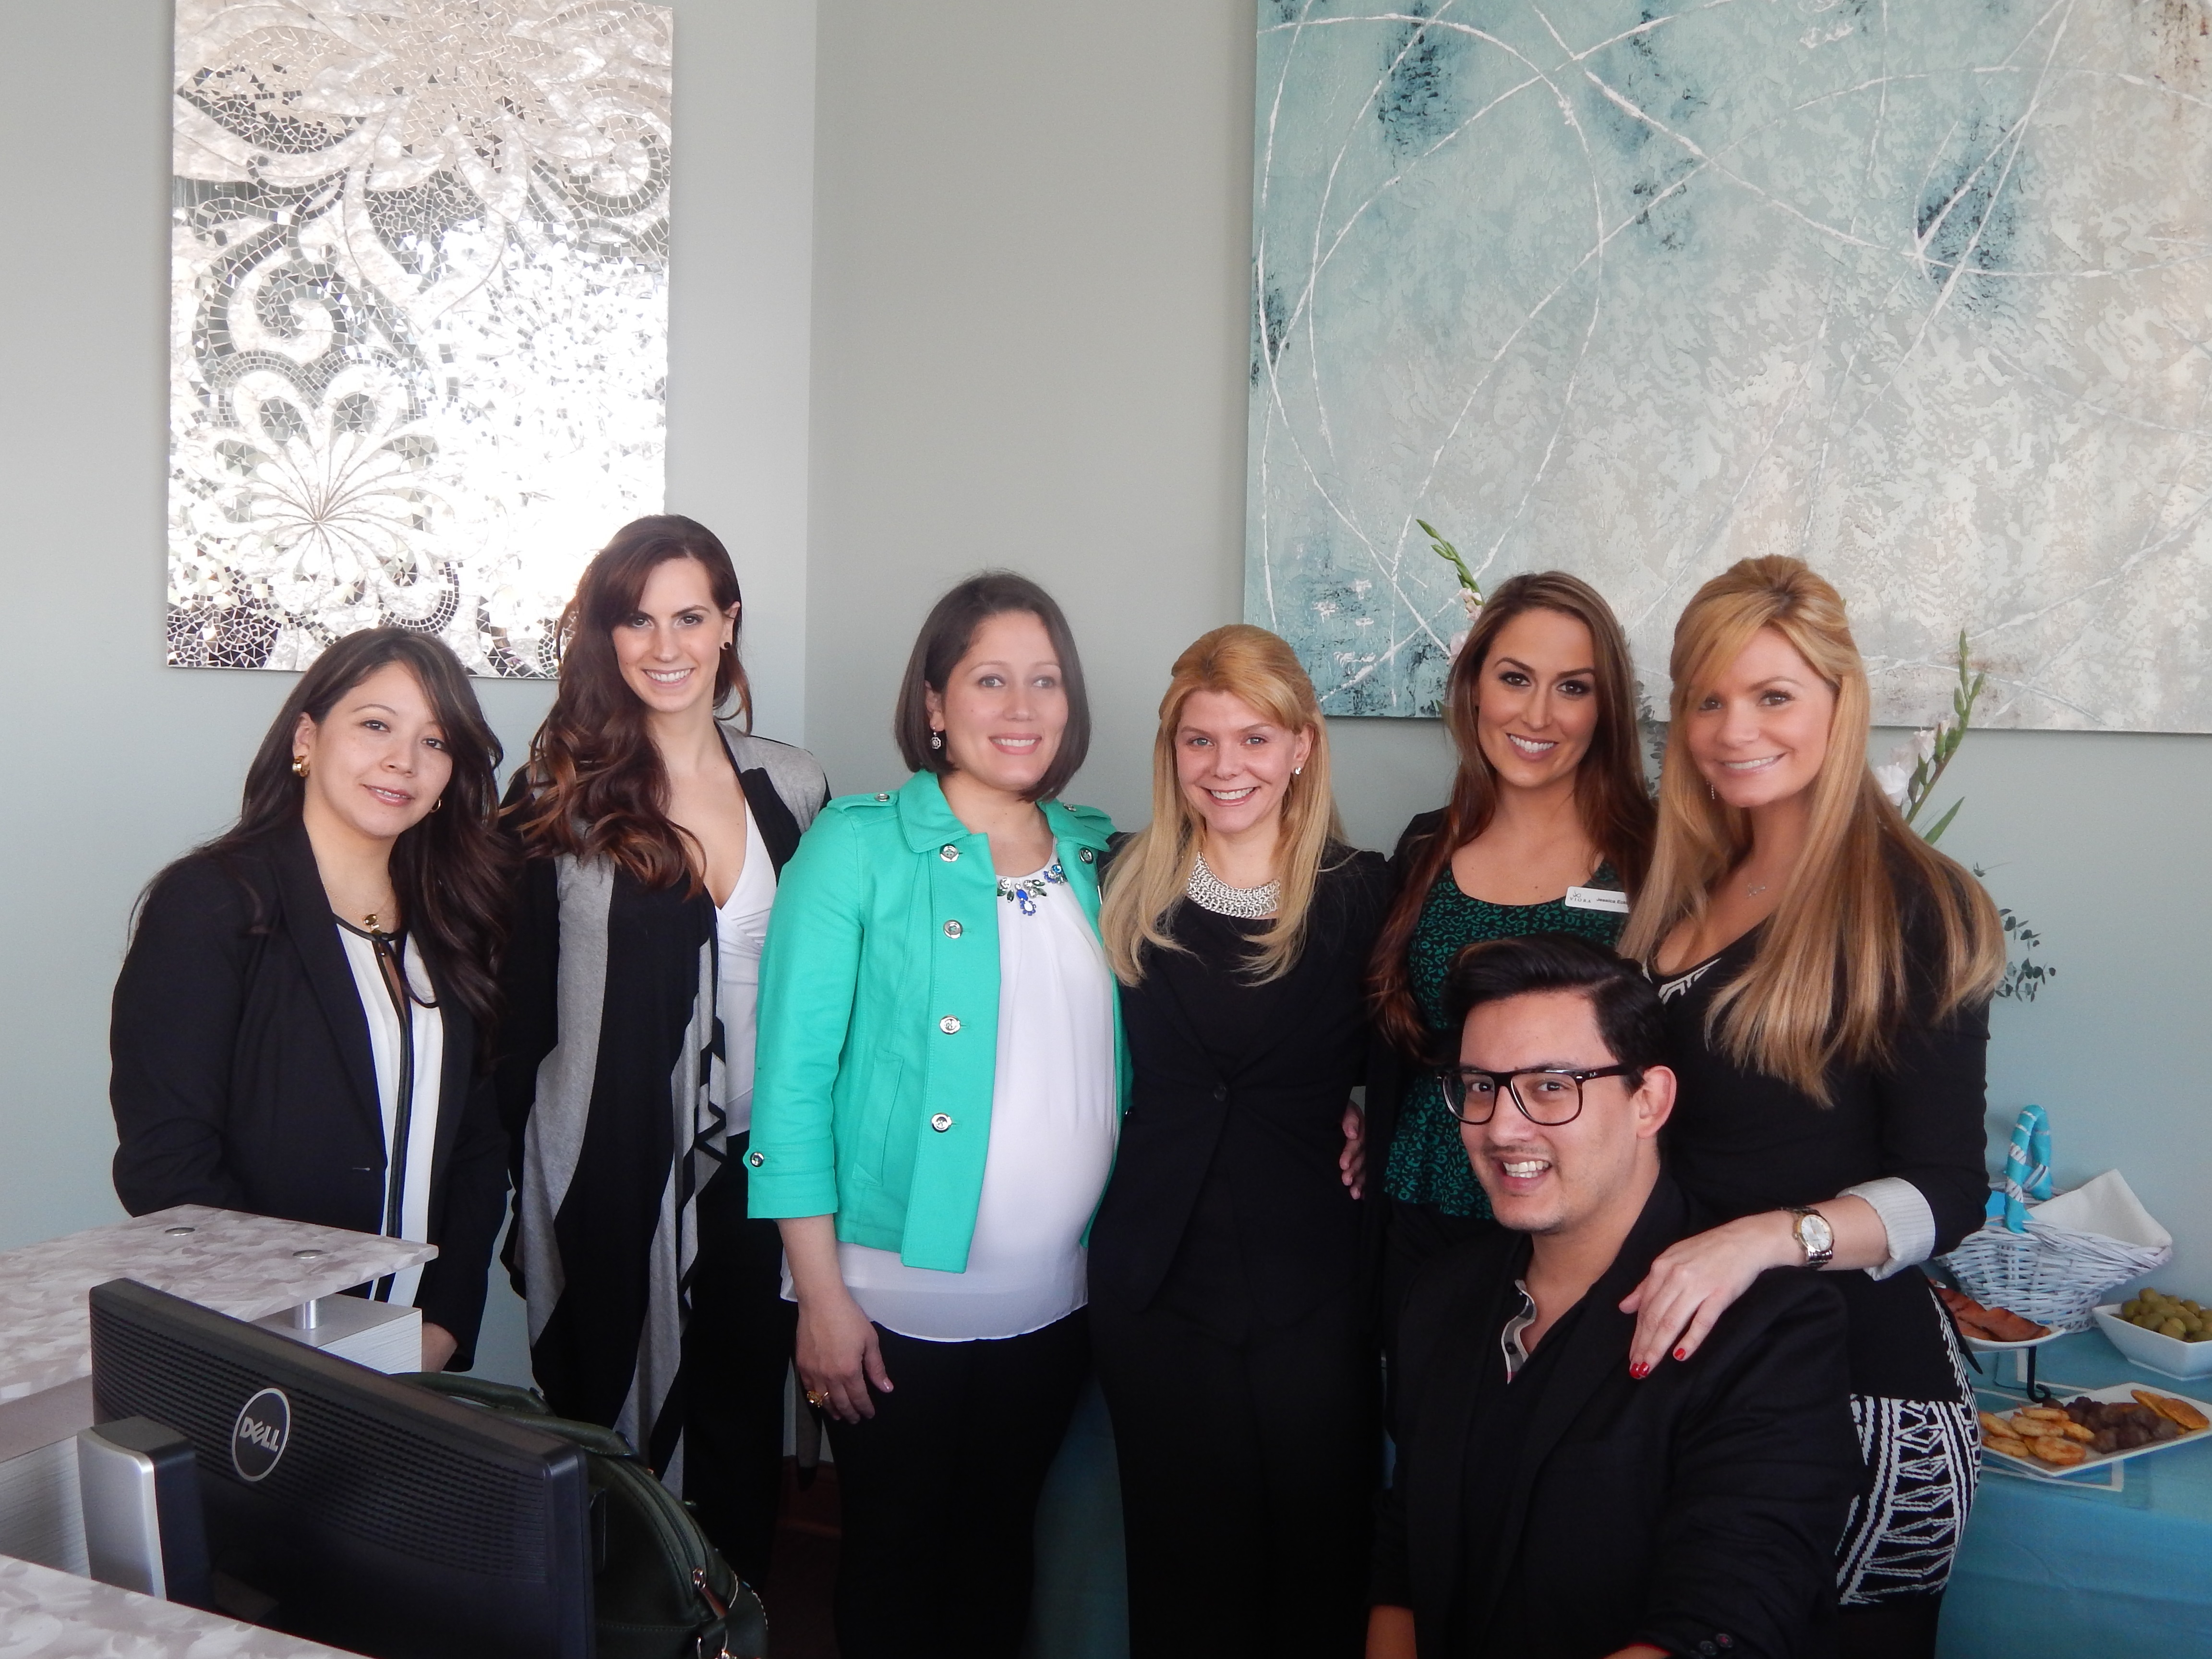 The team at Vitto Dental Spa, from left: Lucy Snider, Megan Ernstberger, Vanessa Bertoni-McElroy, Dr. Andreina Vitto, Jessica Eckles (from Viora Med,) Alex Paredes (kneeling) and Patricia Vitto. (Photo by Karen Kennedy)